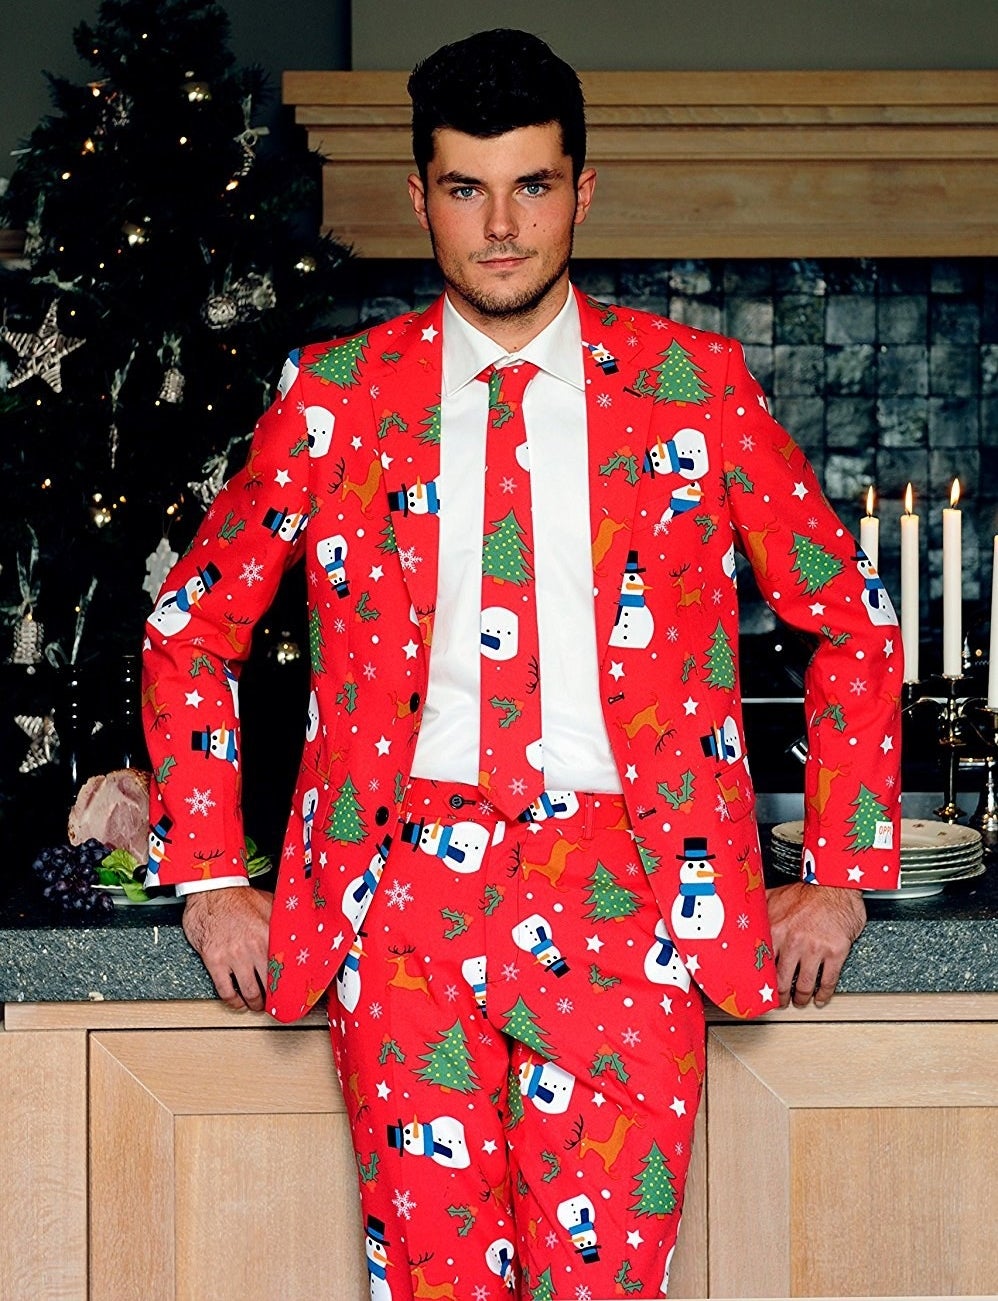 Man in red suit with snowmen, Christmas trees, stars, holly, and reindeer printed on it